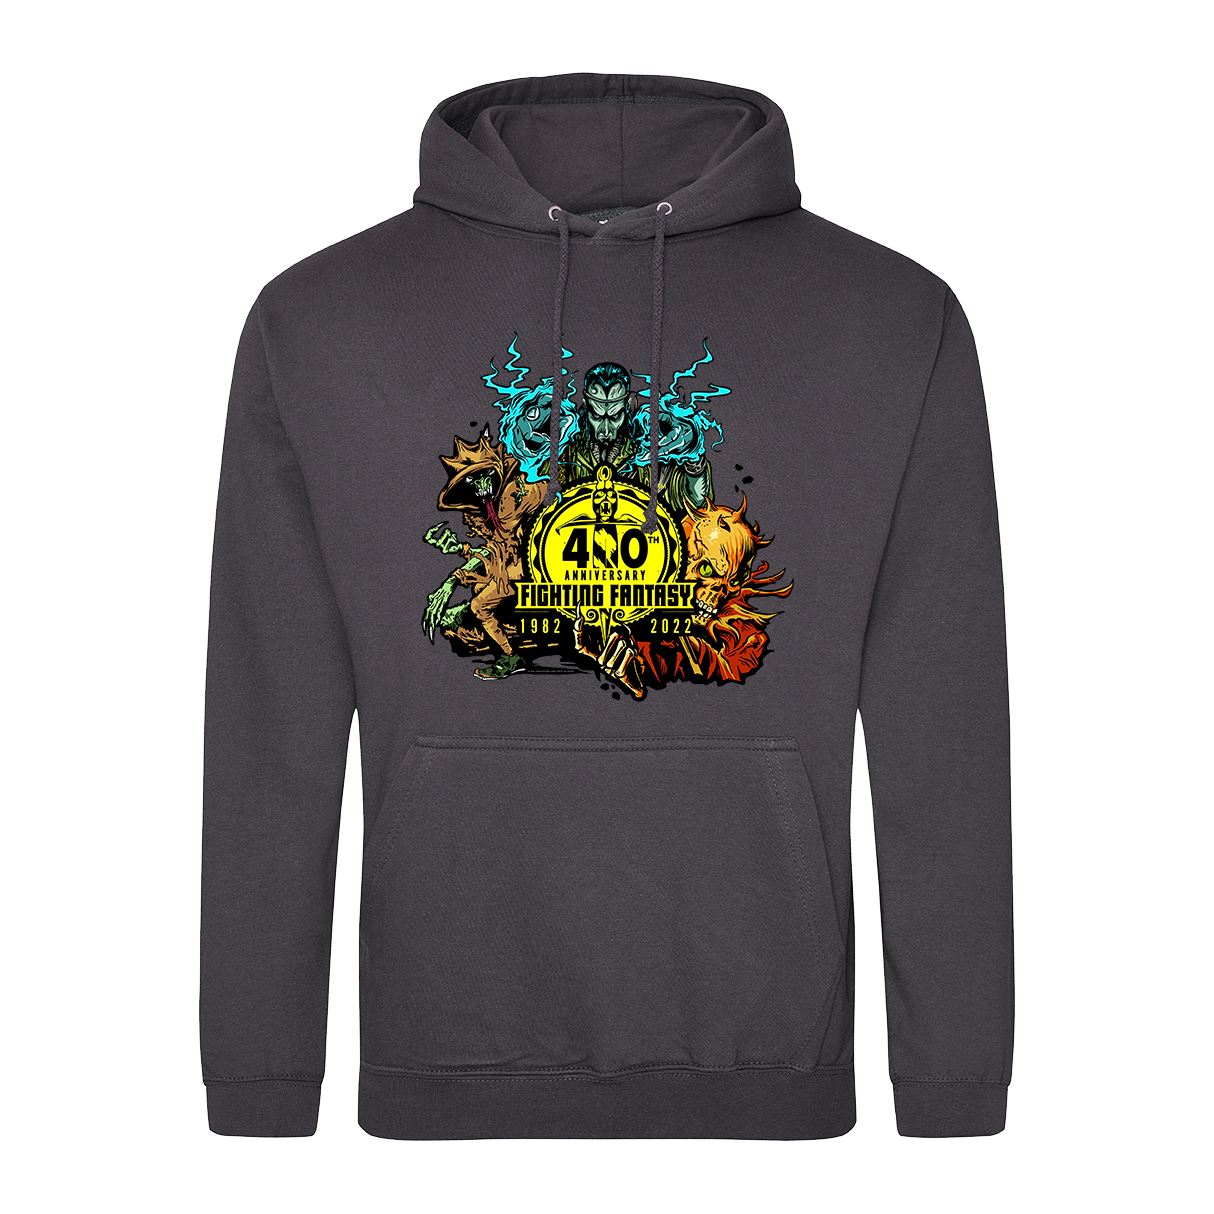 Fighting Fantasy 40th Anniversary Retro Gaming Hoodie Hoodie Seven Squared Small 36" Chest Storm Grey 